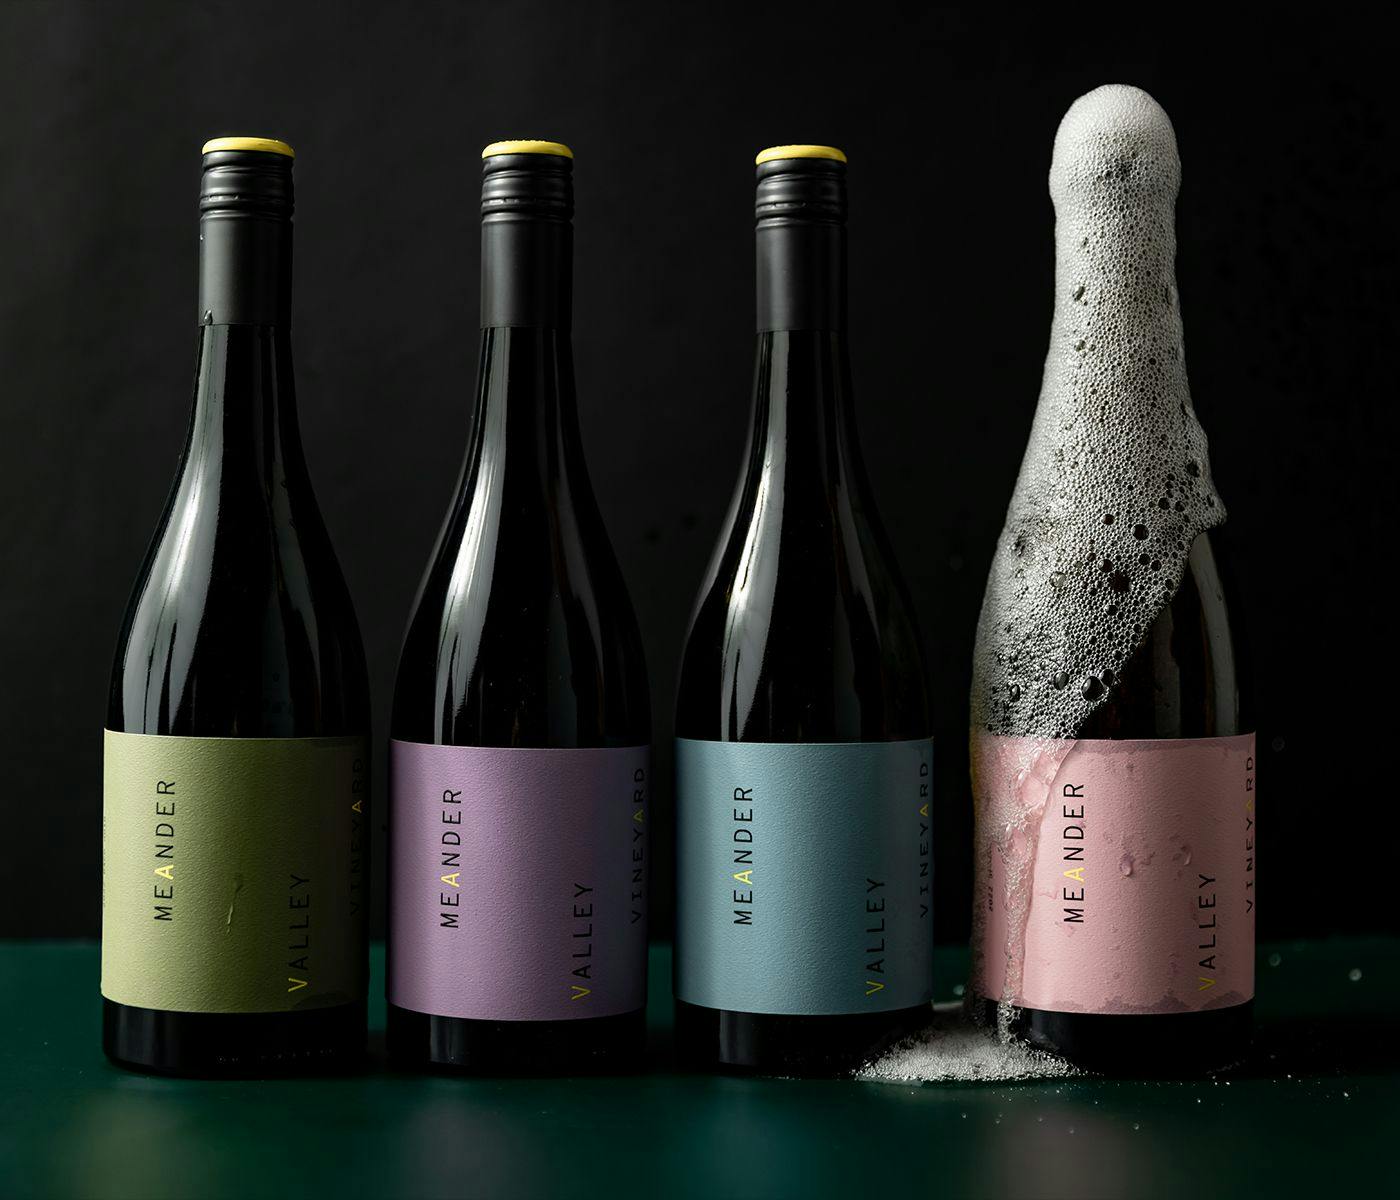 Four bottles of Meander Valley wine, the rightmost is covered in flowing bubbly wine,